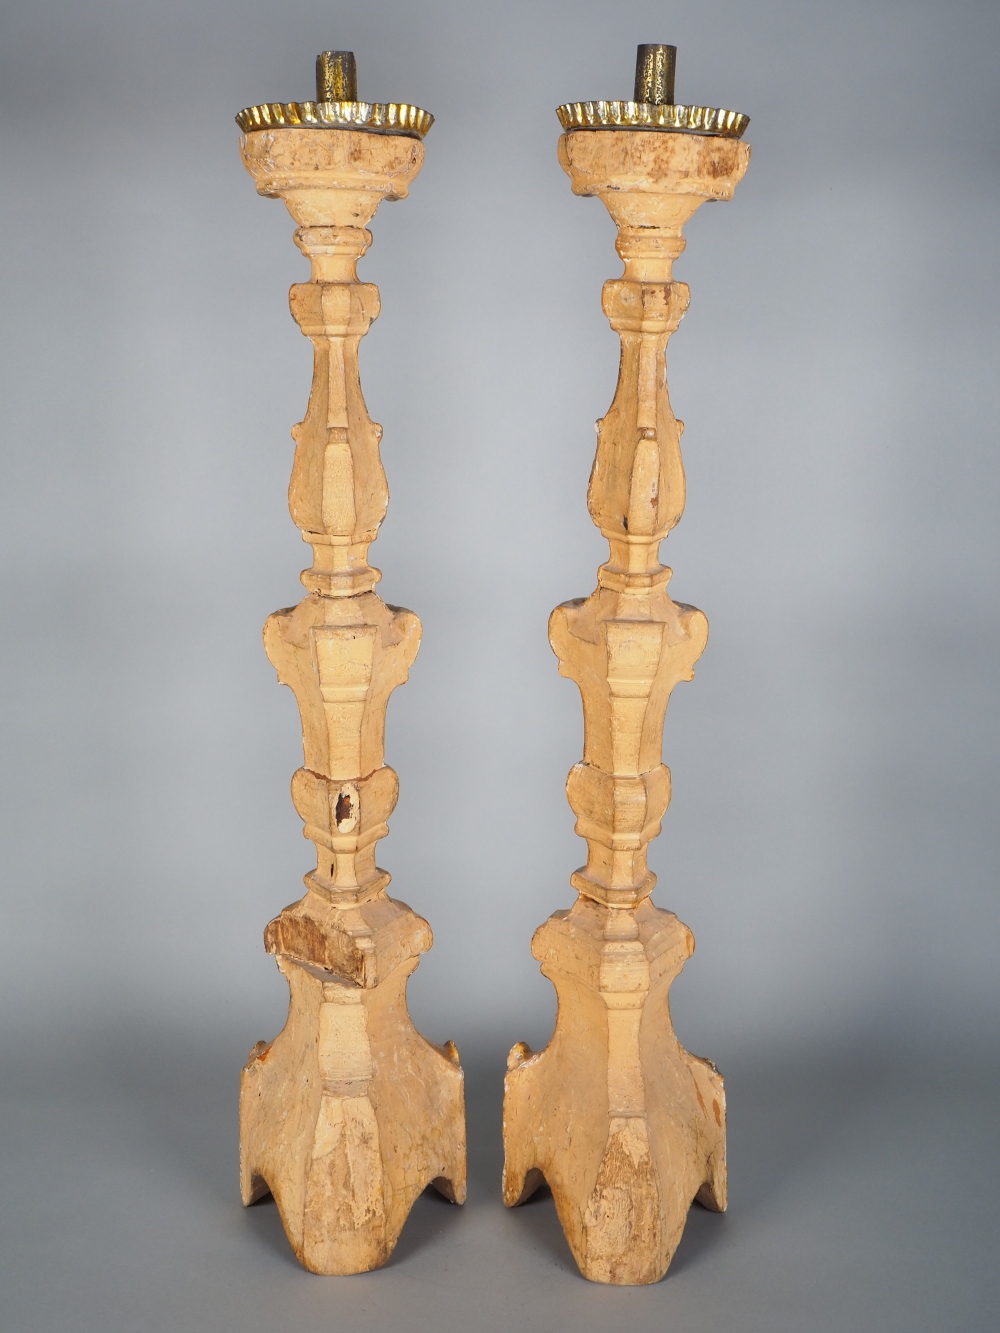 Pair of baroque altar candlesticks, 18th c. - Image 2 of 2